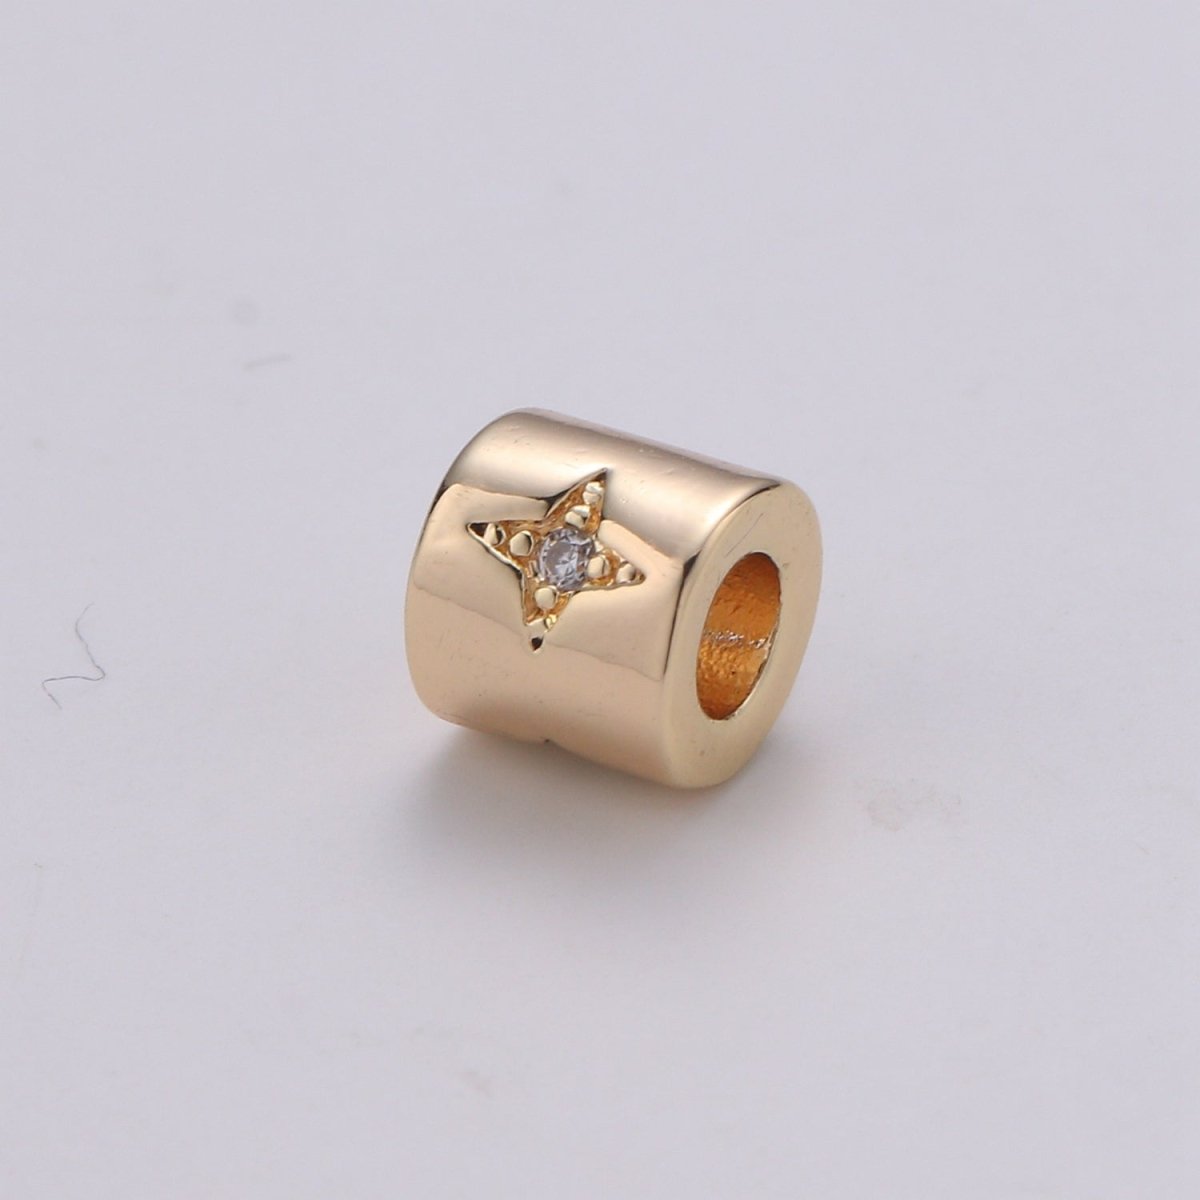 Tiny Beads 6mm Bead CZ Gold Beads Star Beads cylinder Cubic Beads for Bracelet Necklace Supply Large Hole Beads 3mm hole - DLUXCA